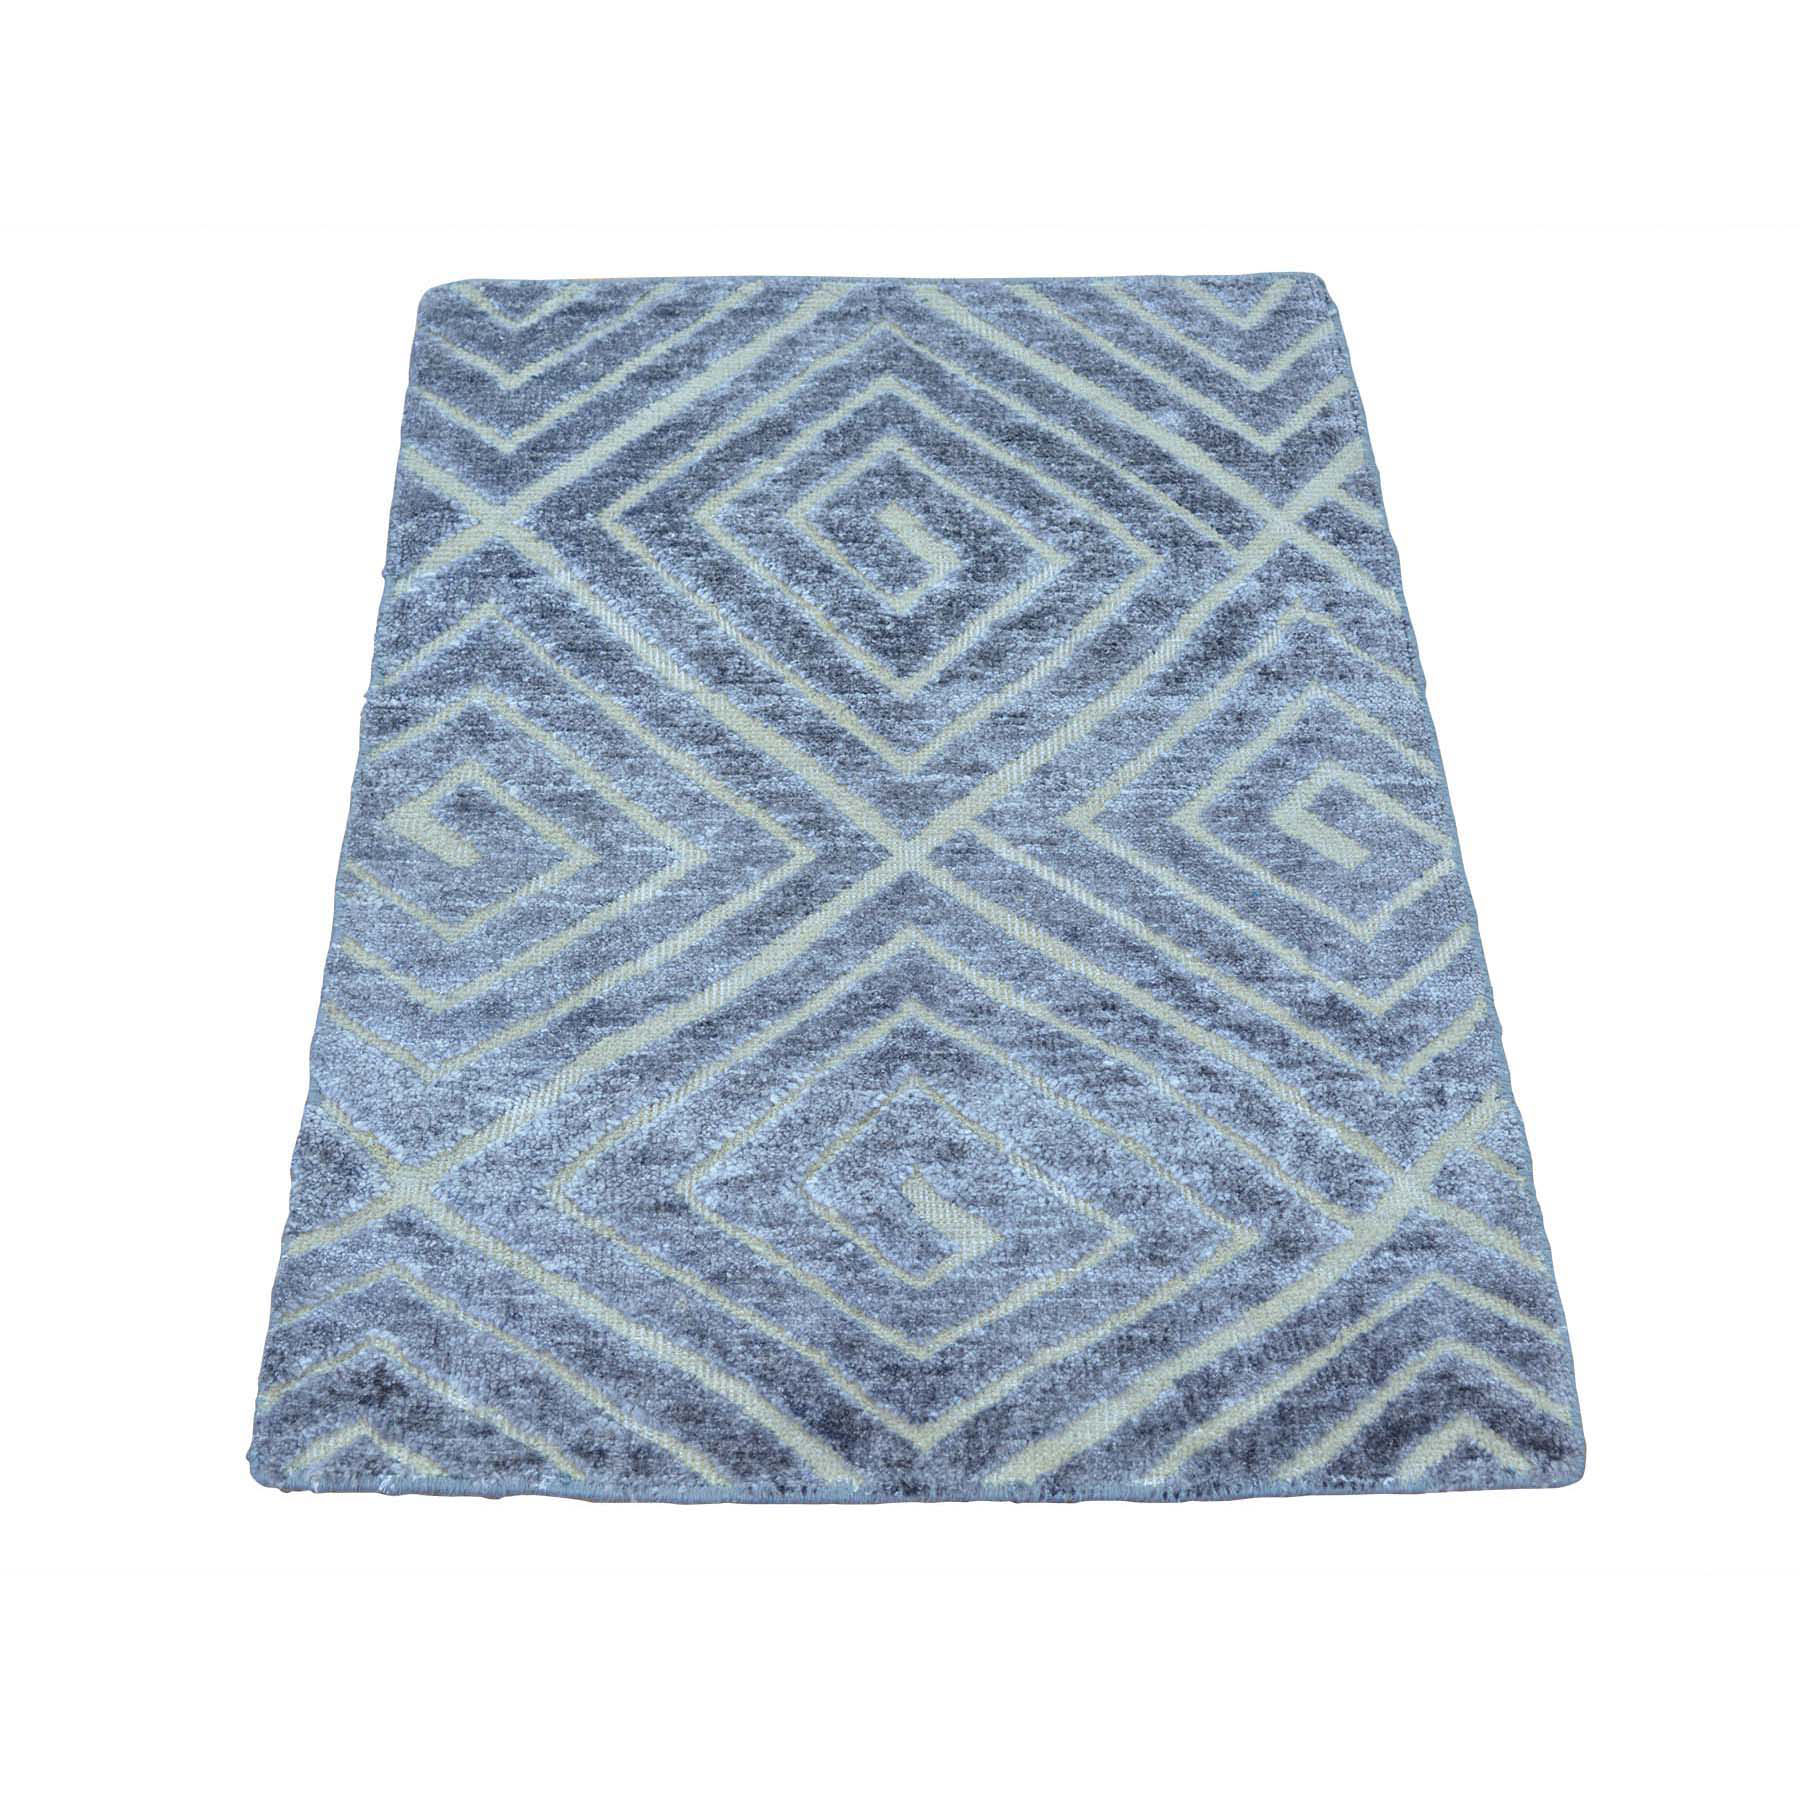 2' X 3' Wool And Silk High And Low Pile Modern Hand Knotted Rug moabc7da